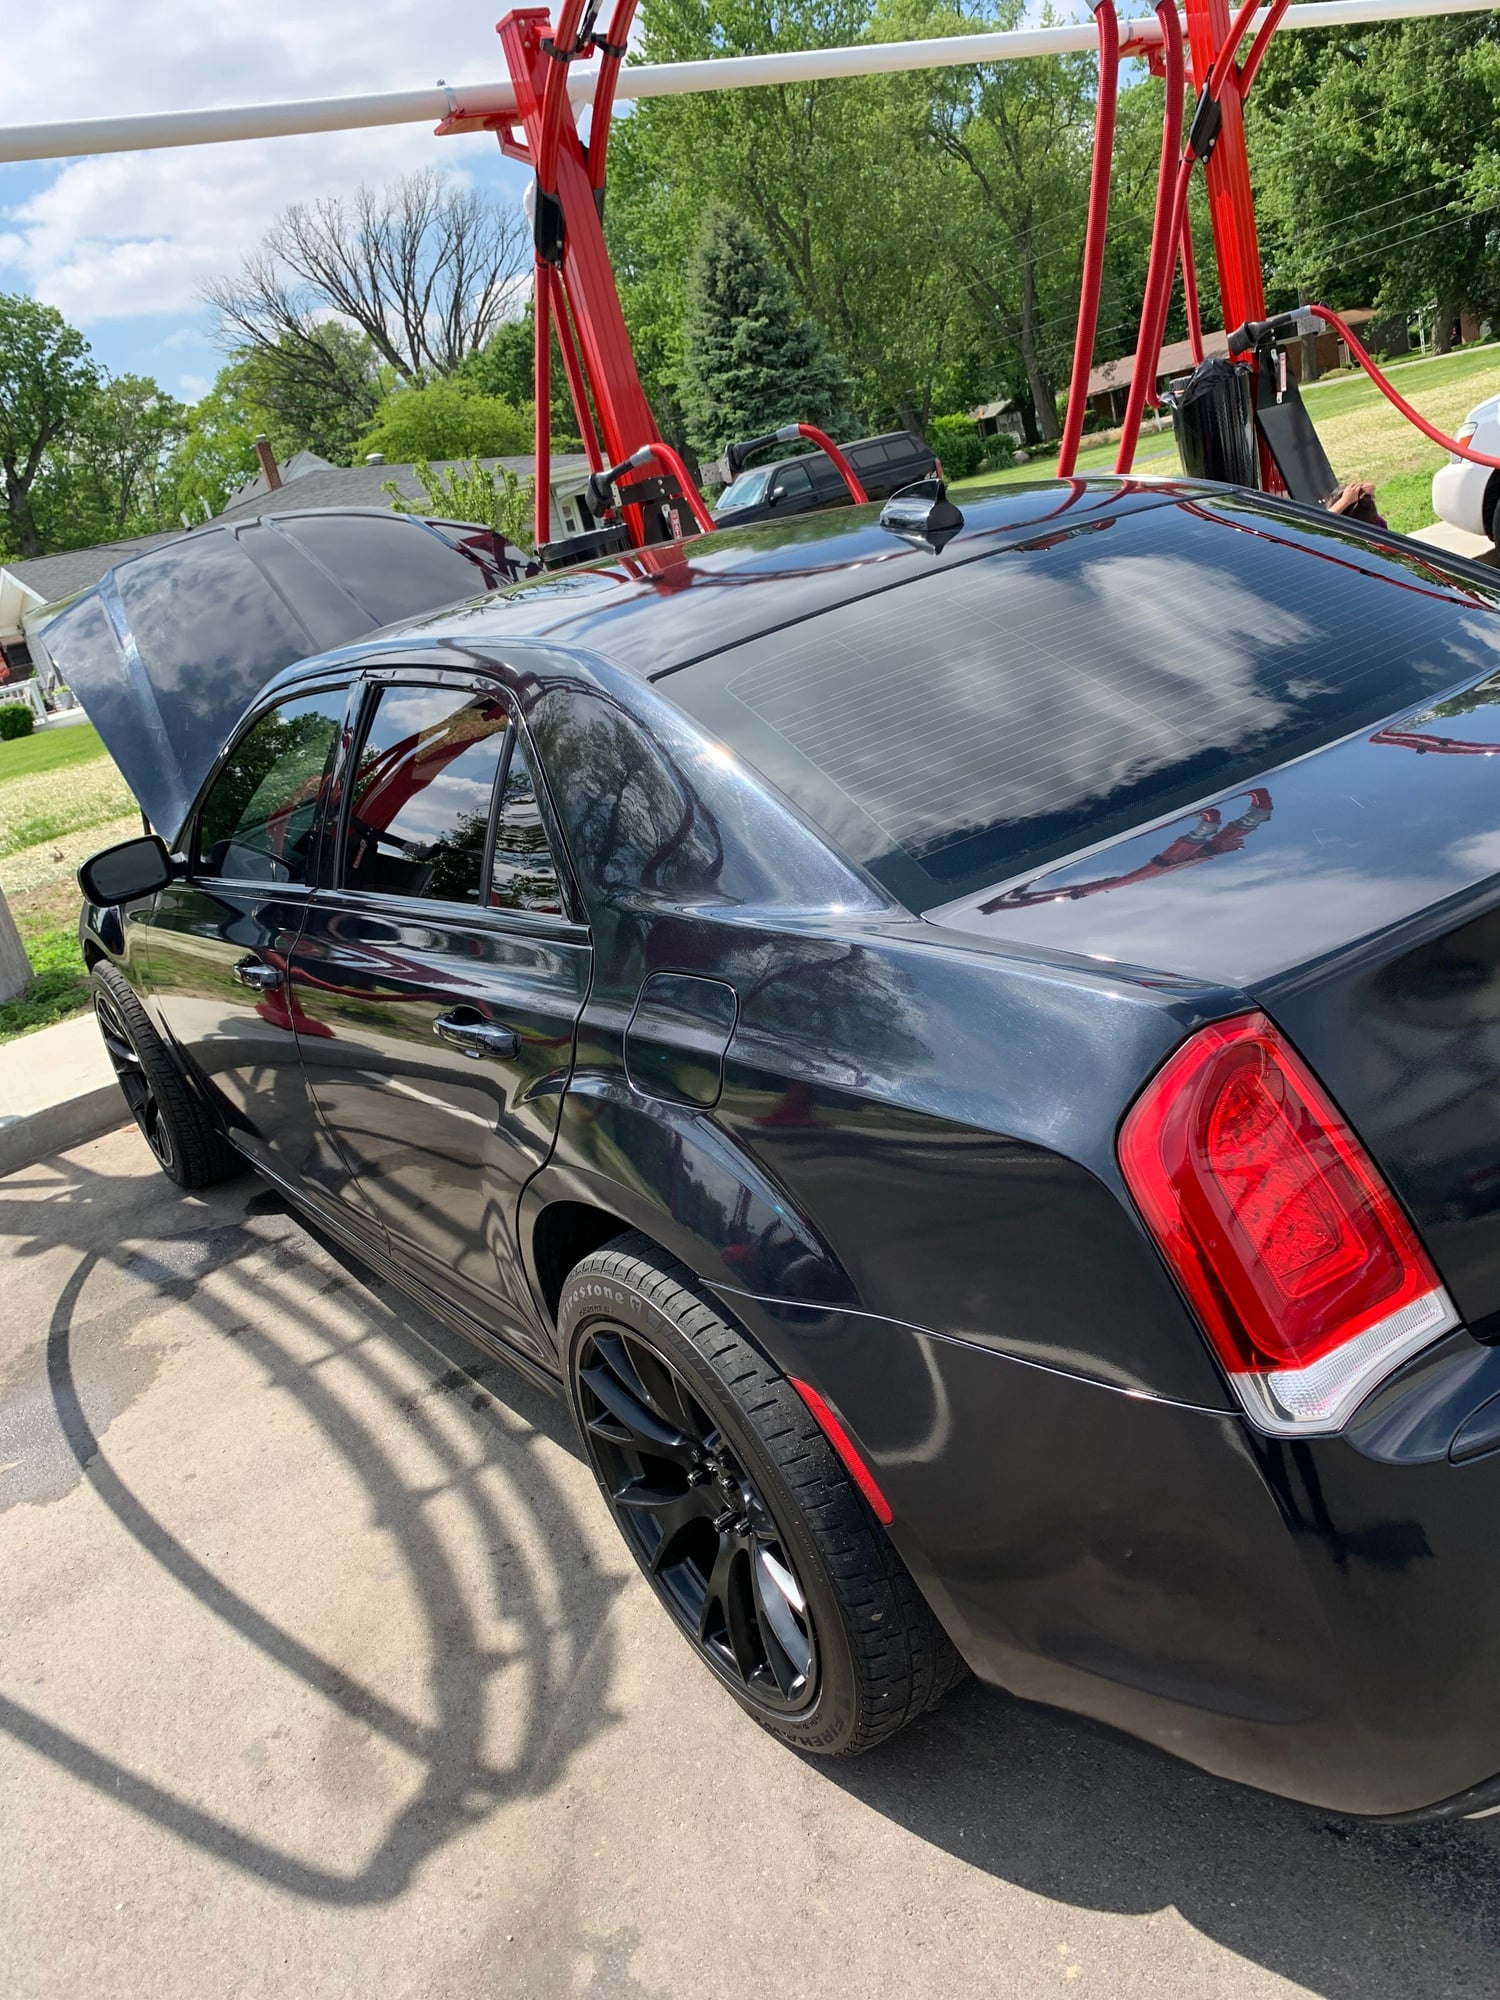 2018 Chrysler 300 - 2018 Chrysler 300S - Used - VIN 2c3ccagg1jh268828 - 45,000 Miles - 6 cyl - AWD - Automatic - Sedan - Black - Fort Wayne, IN 46808, United States